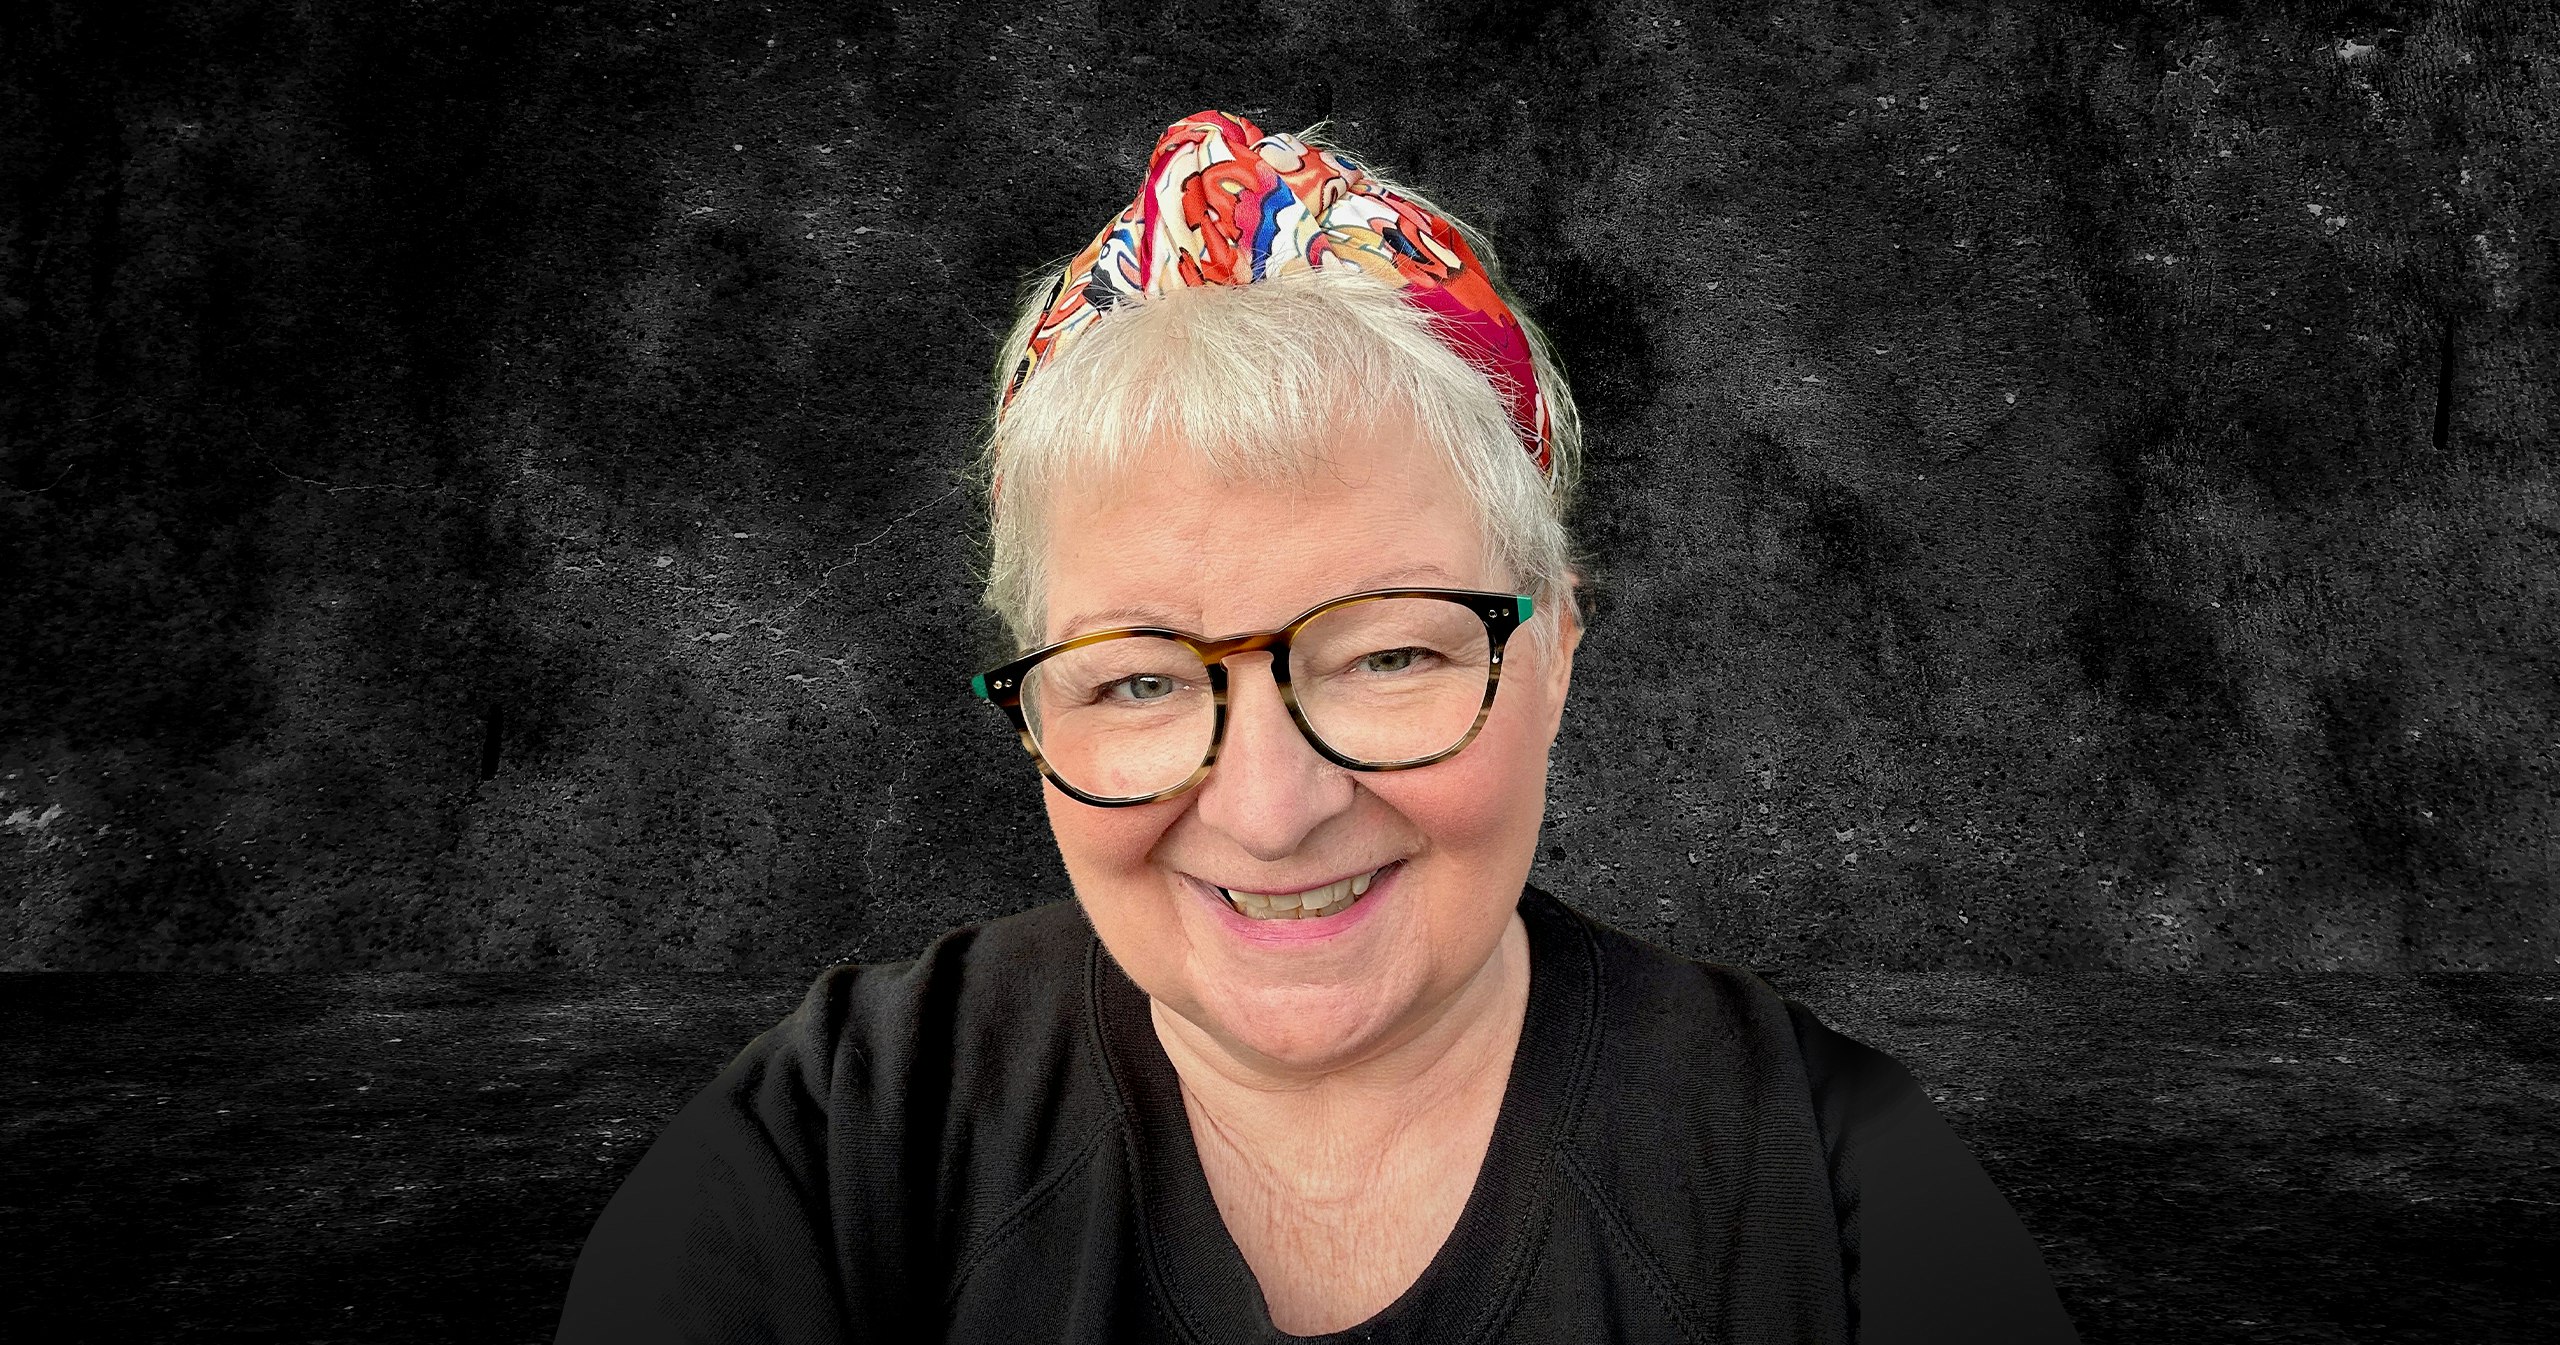 A head and sholders shot of Janey Godley.  She is wearing a black top and glasses with a headband on her short blonde hair.  She is smiling.